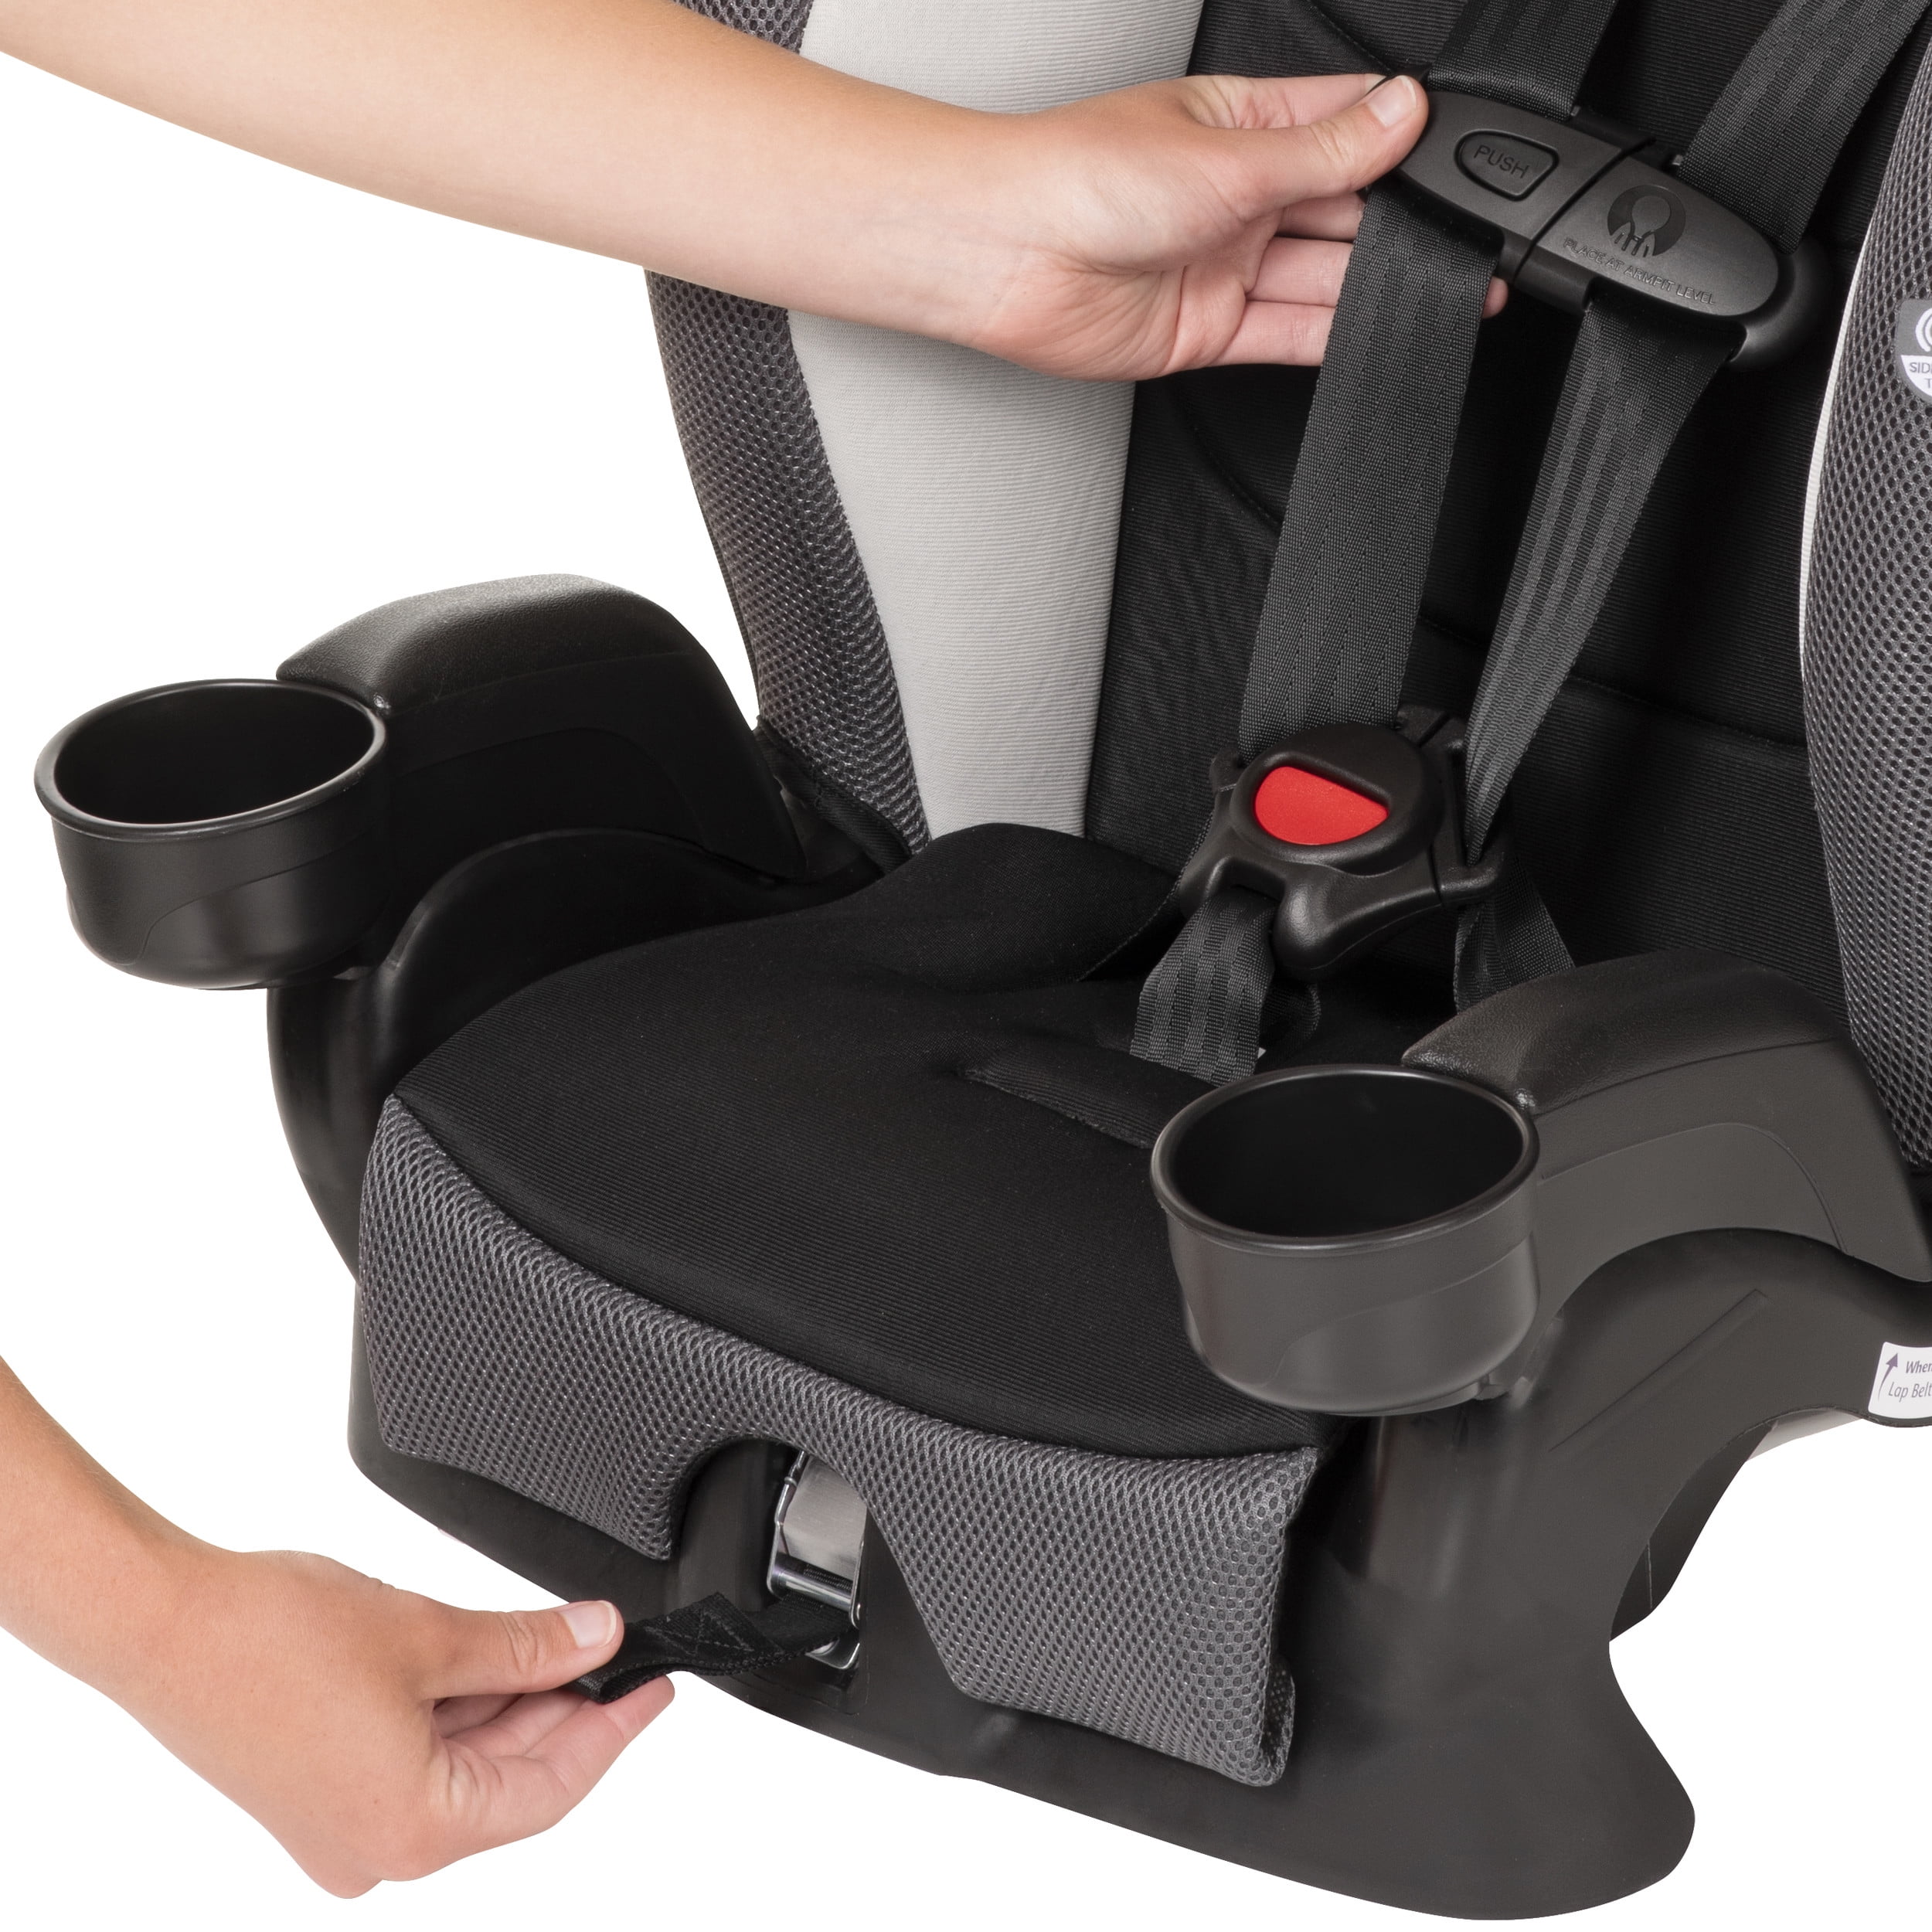 Evenflo Chase Plus 2-in-1 Booster Car Seat (Huron Black) - 2